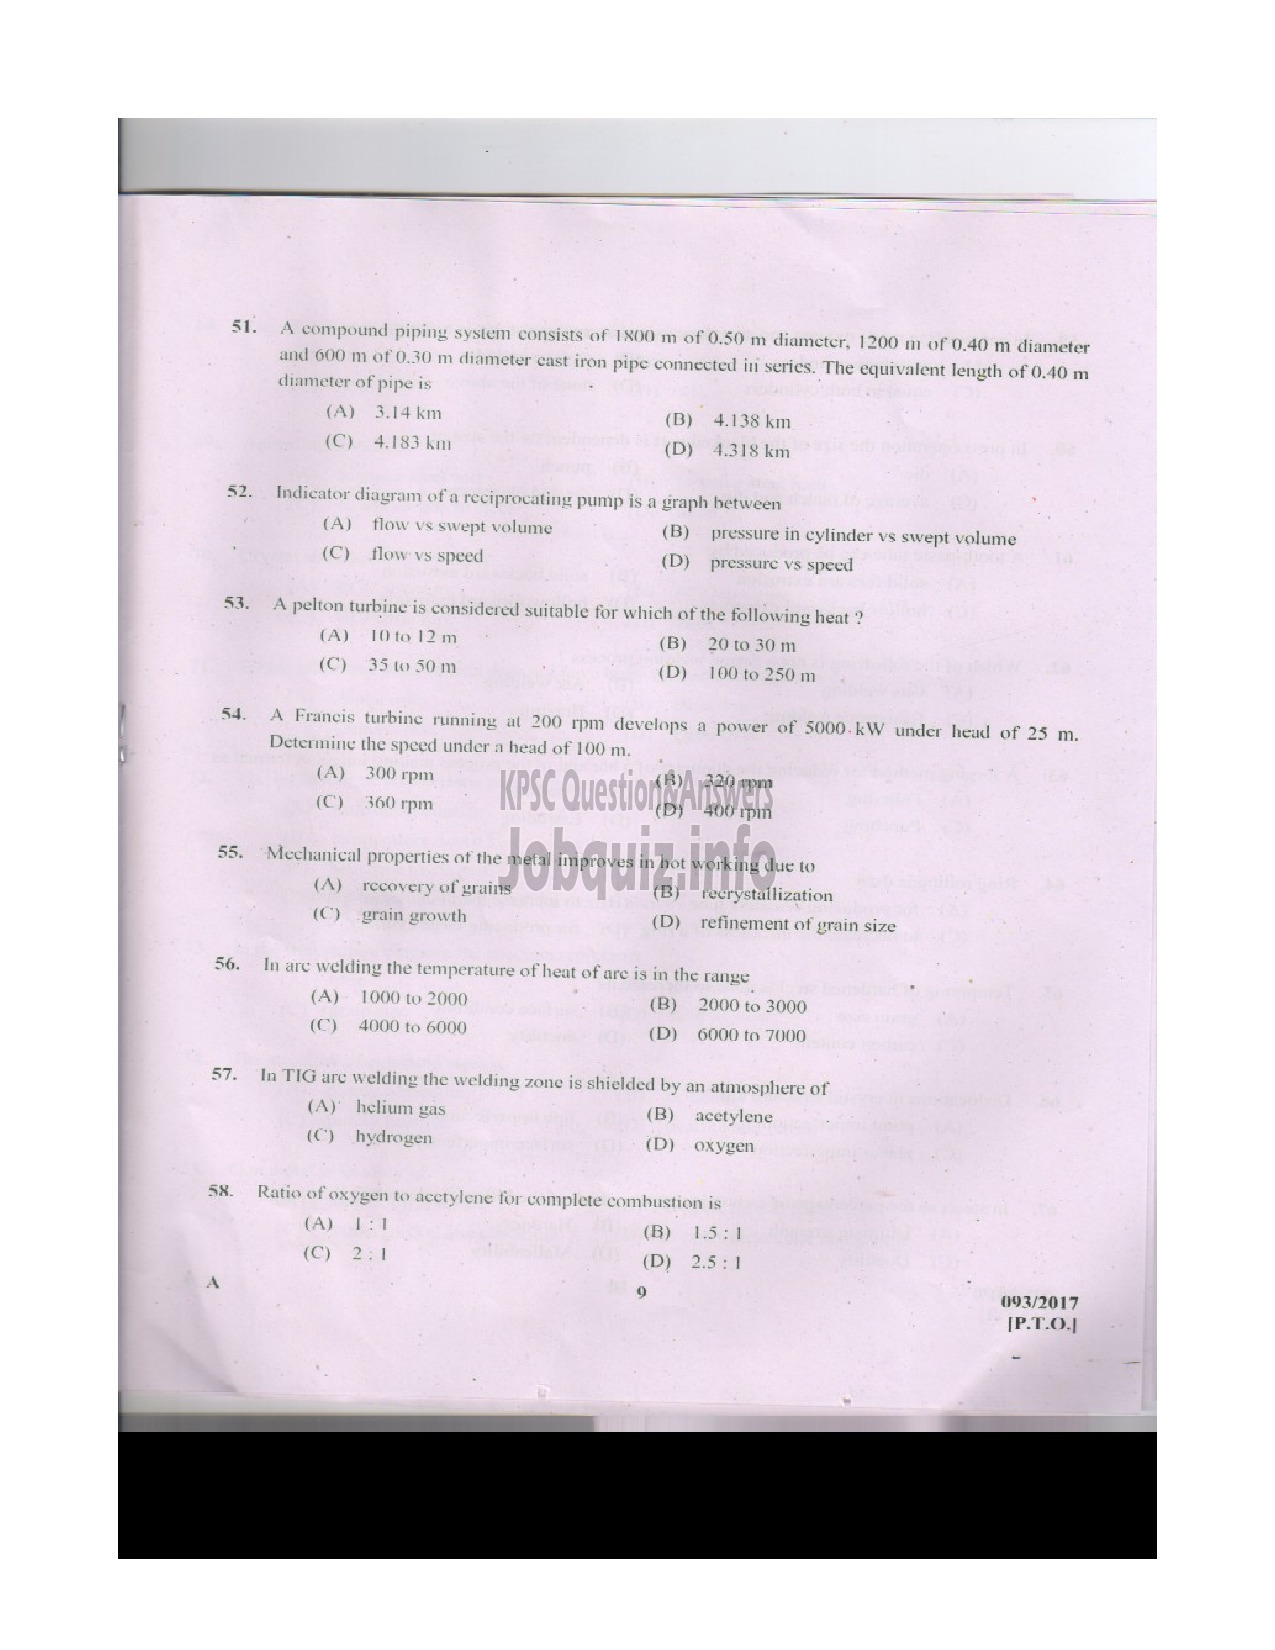 Kerala PSC Question Paper - INSTRUCTOR GRADE I MECHANICAL ENGINEERING ENGINEERING COLLEGES-8